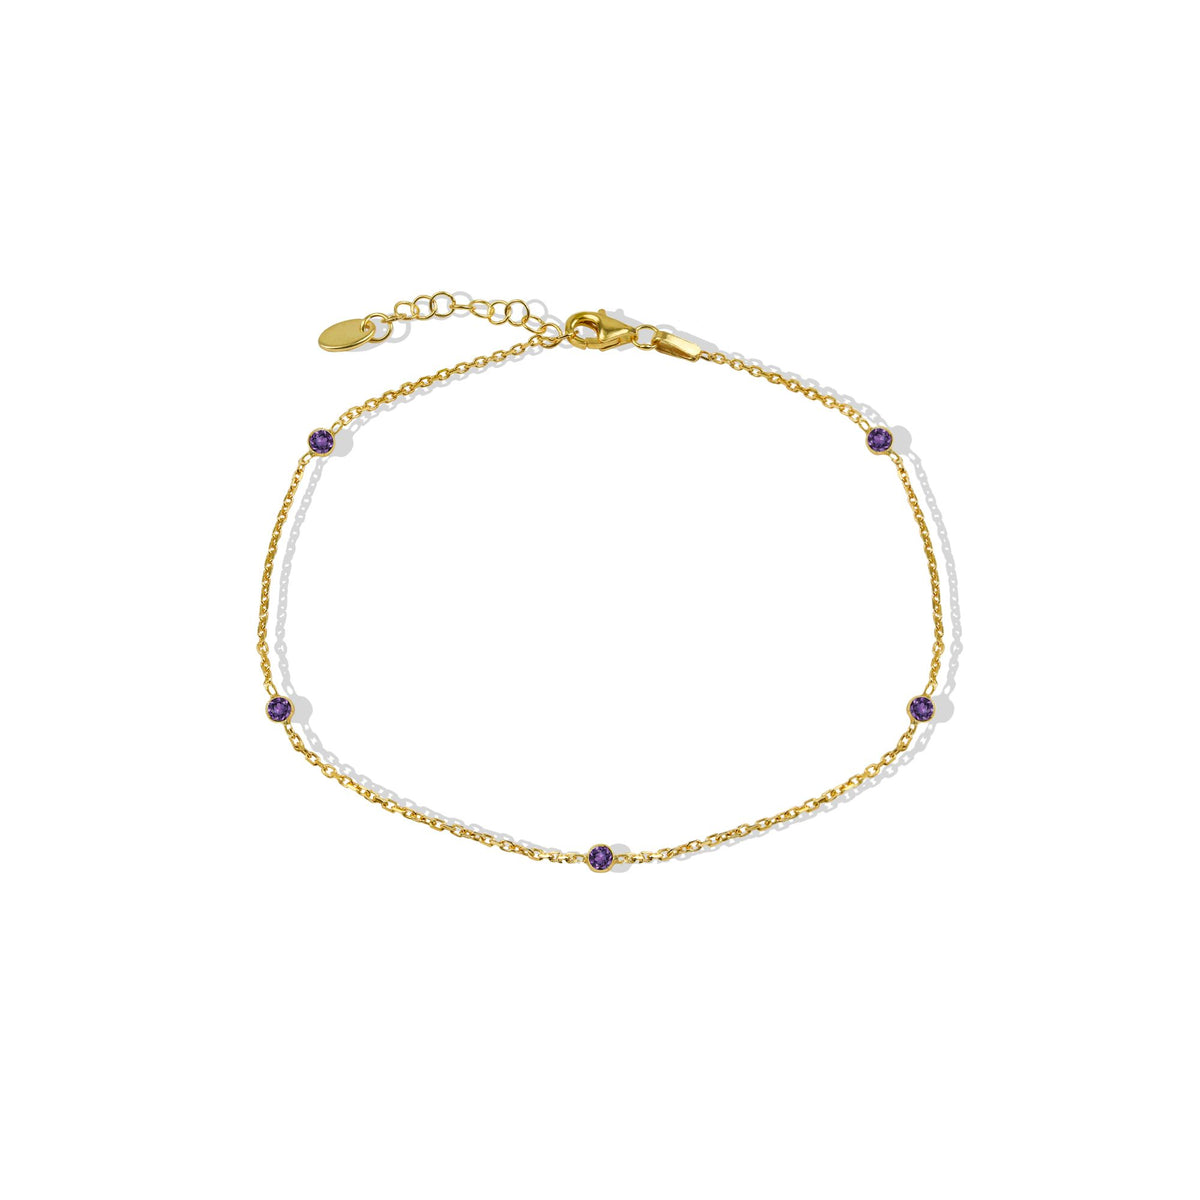 ARGENTO VIVO GOLD PLATED 925 STERLING SILVER ROPE CHAIN ANKLET